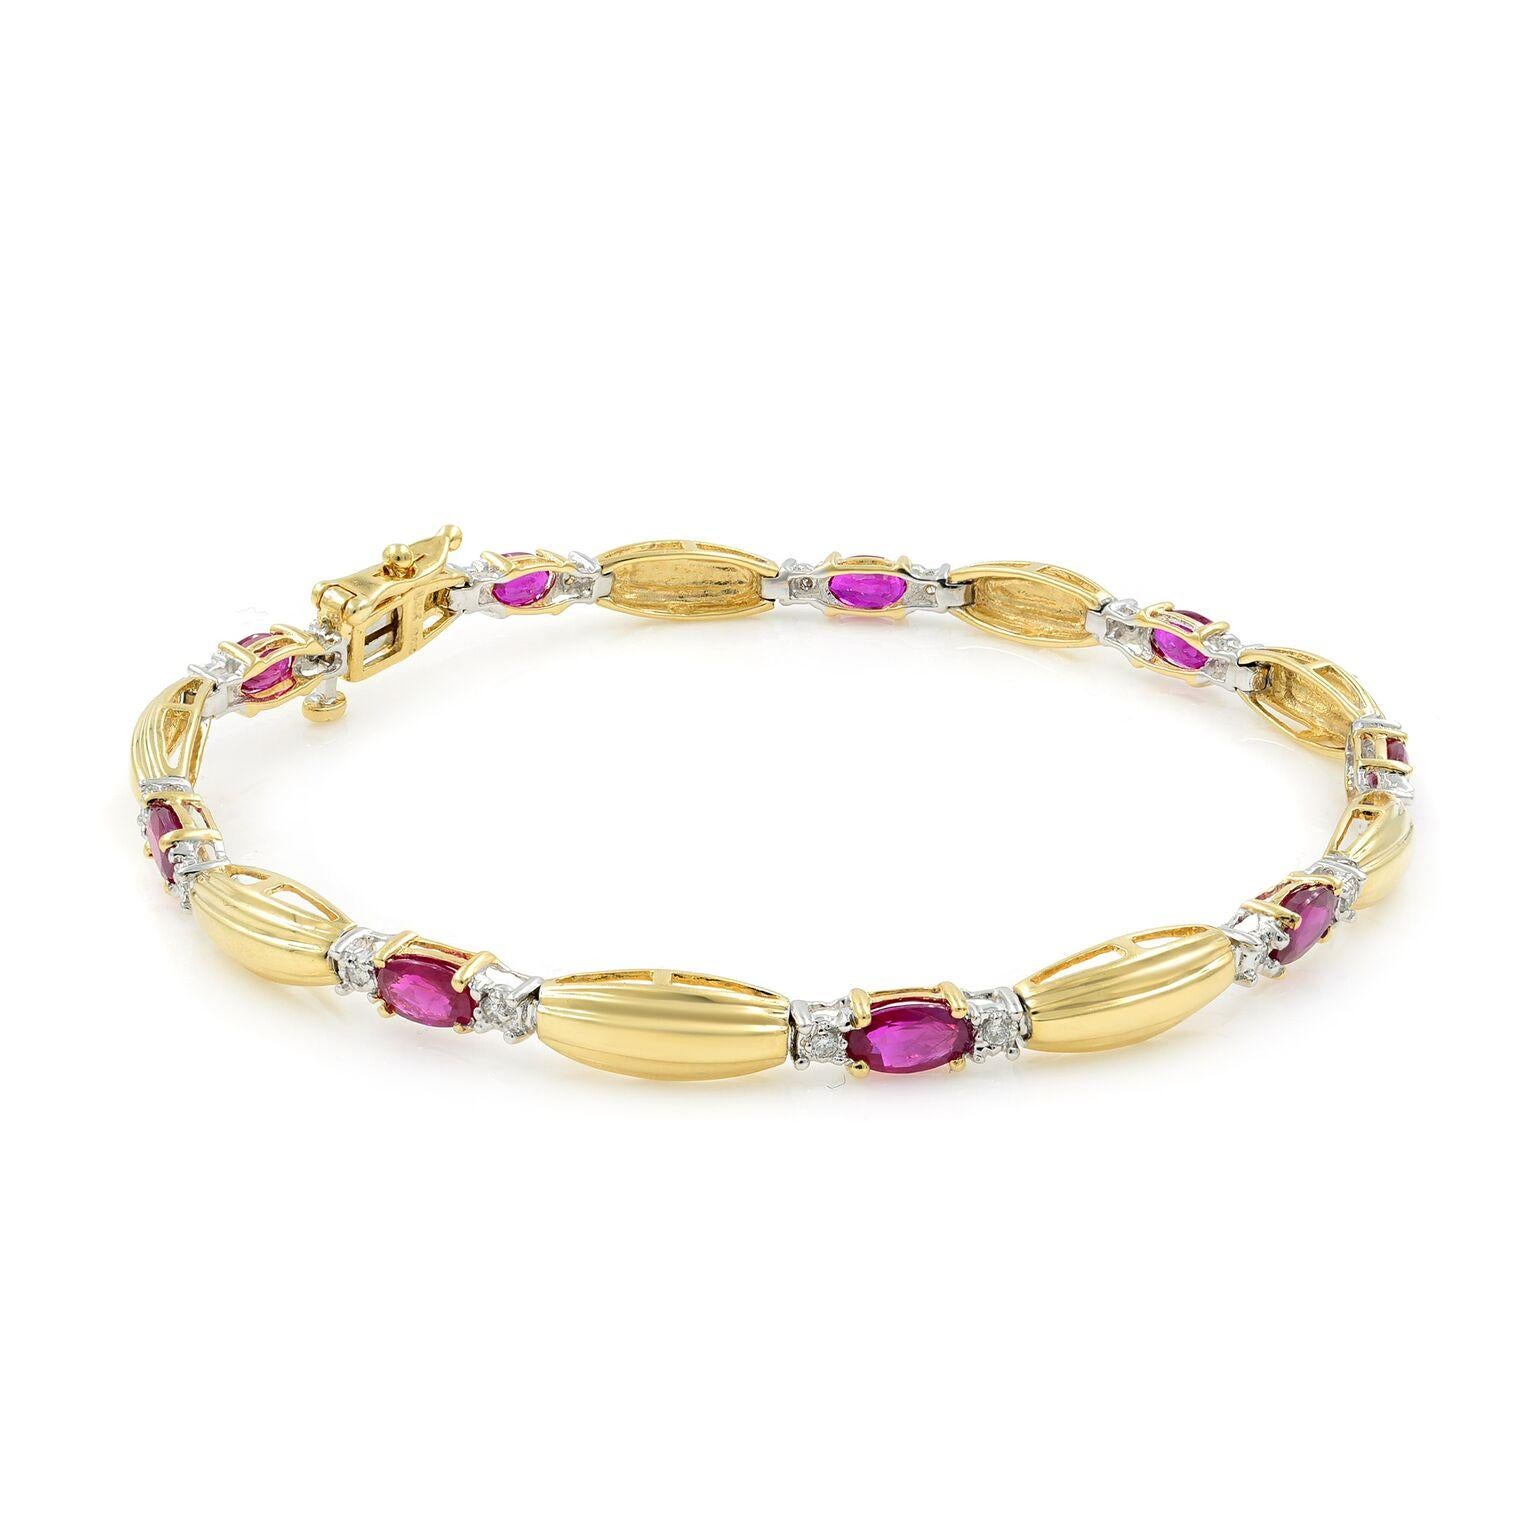 An elegantly tailored tennis bracelet in 14K yellow gold with alternating sections of nine oval cut rubies and 18 round cut diamonds. Measures 7 1/4 inches long by 3/7 inch wide.